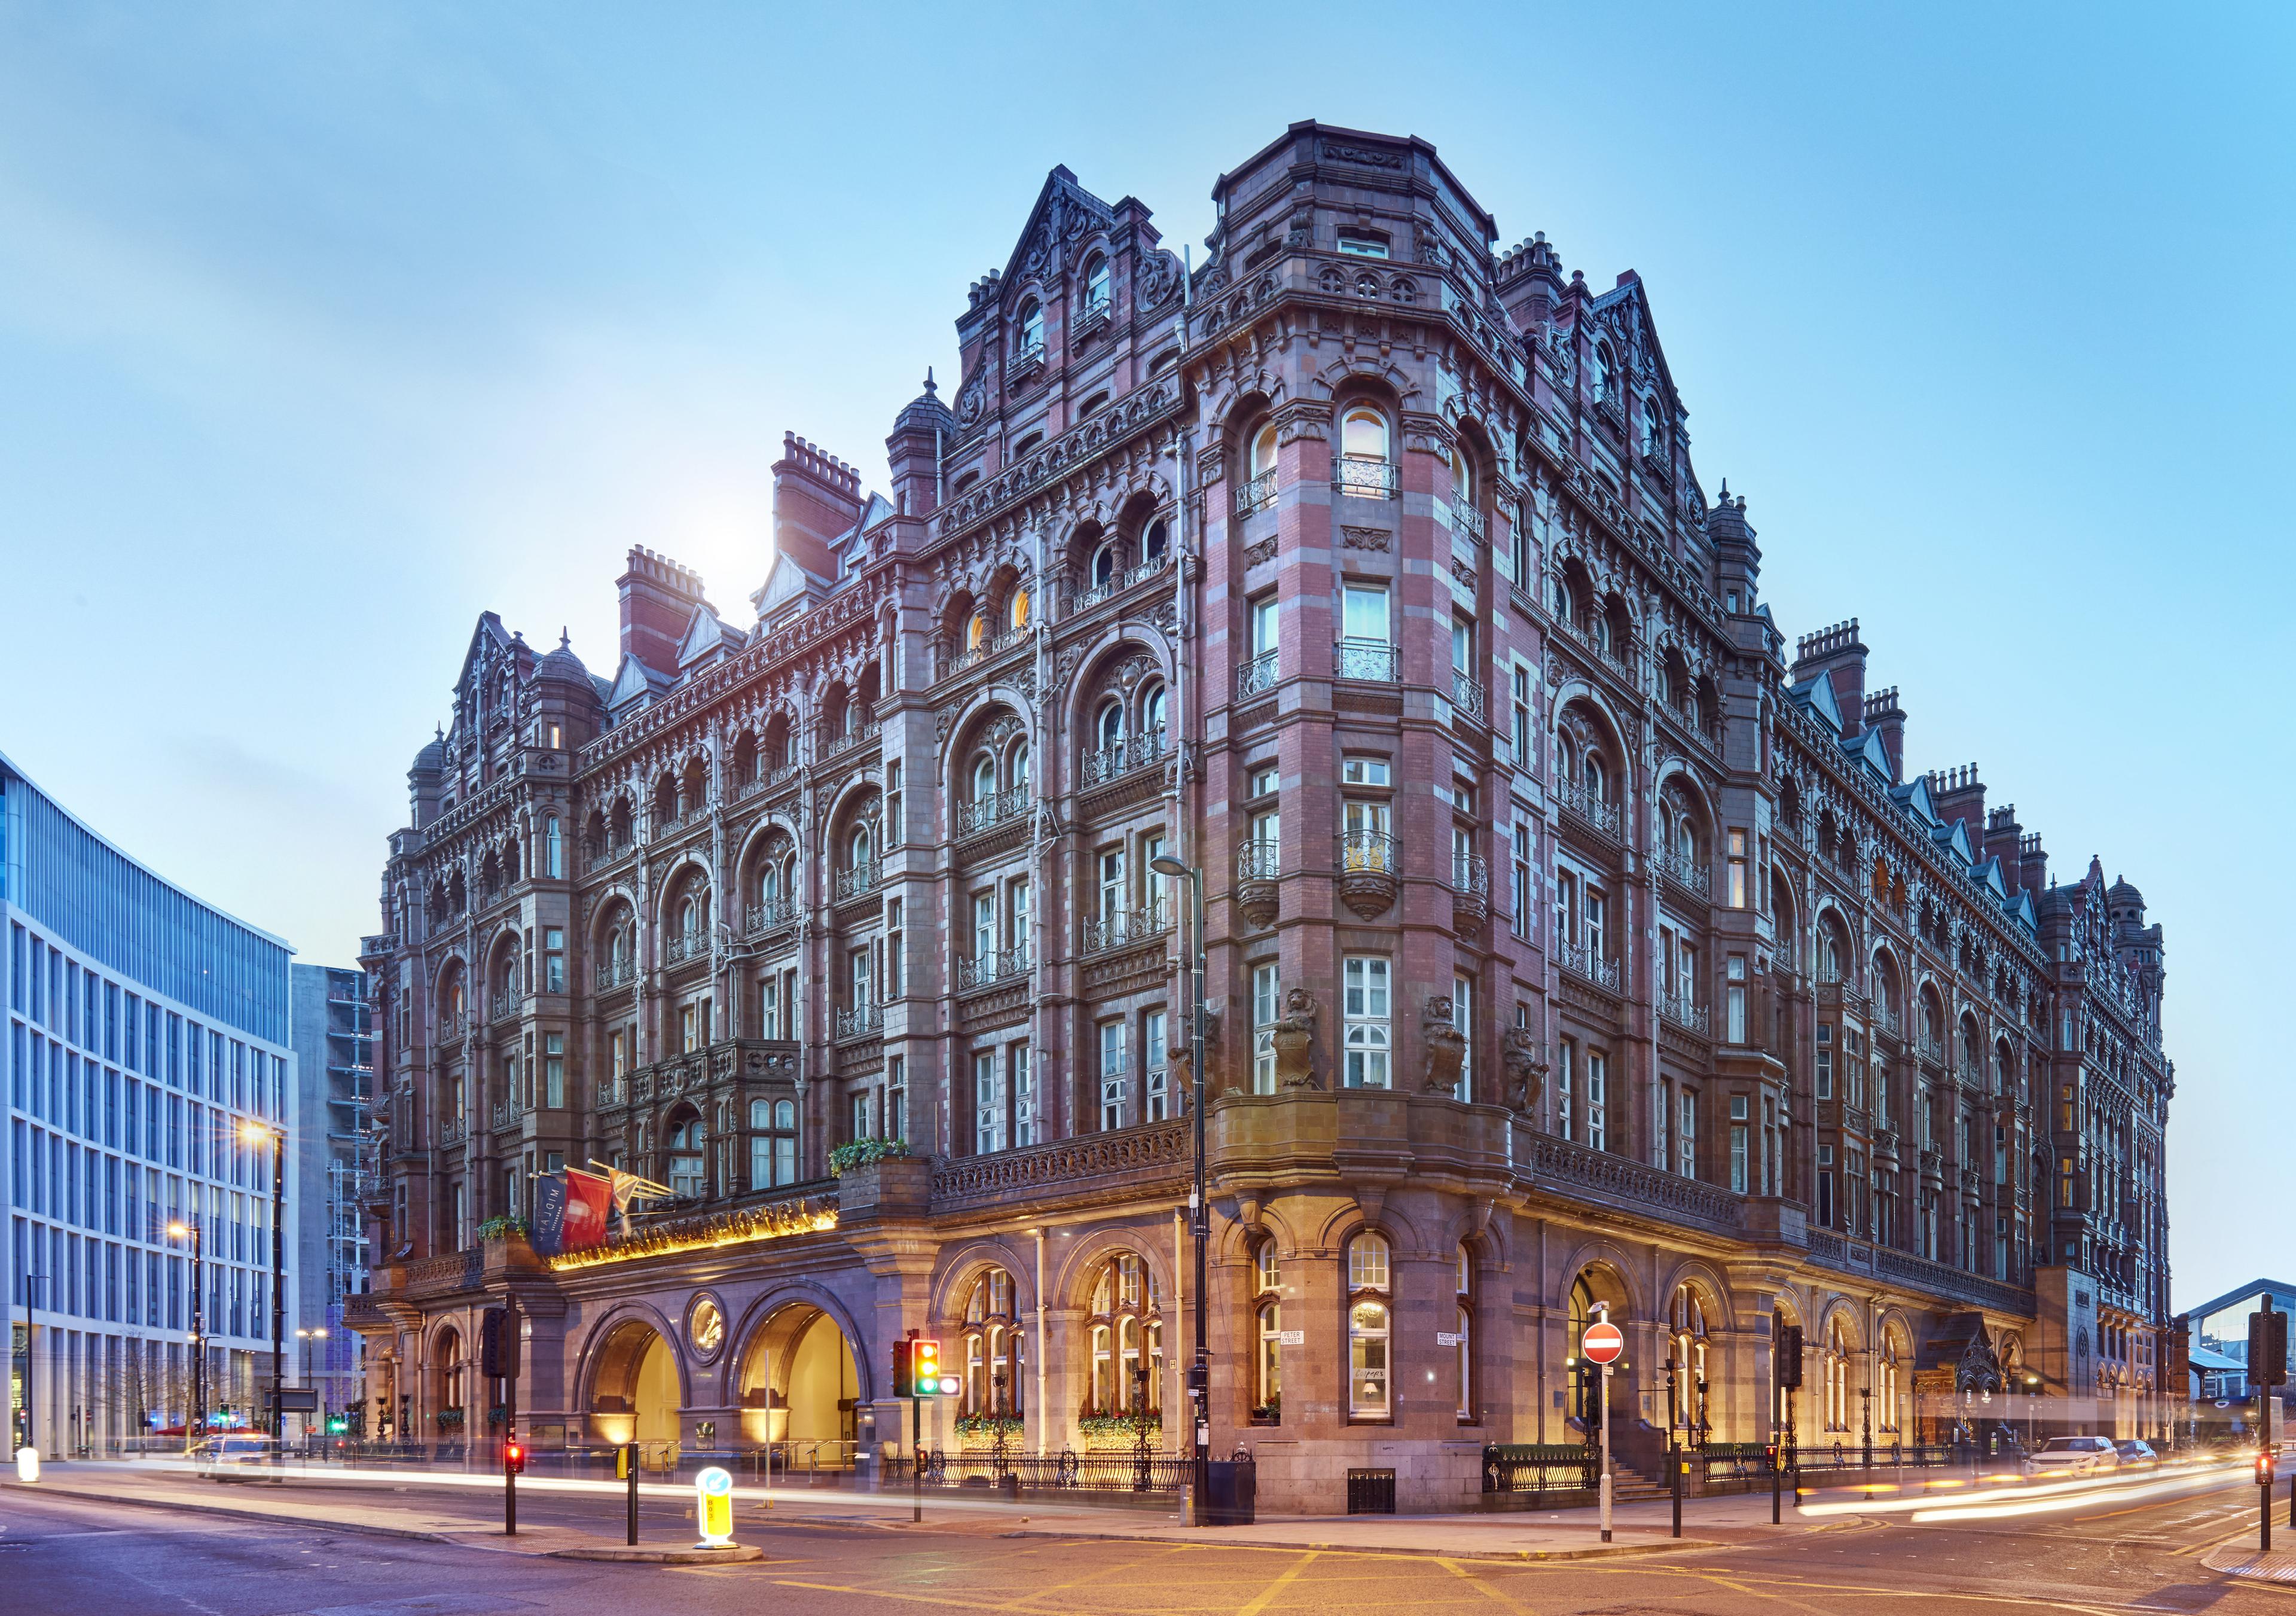 The Midland in MANCHESTER, United Kingdom